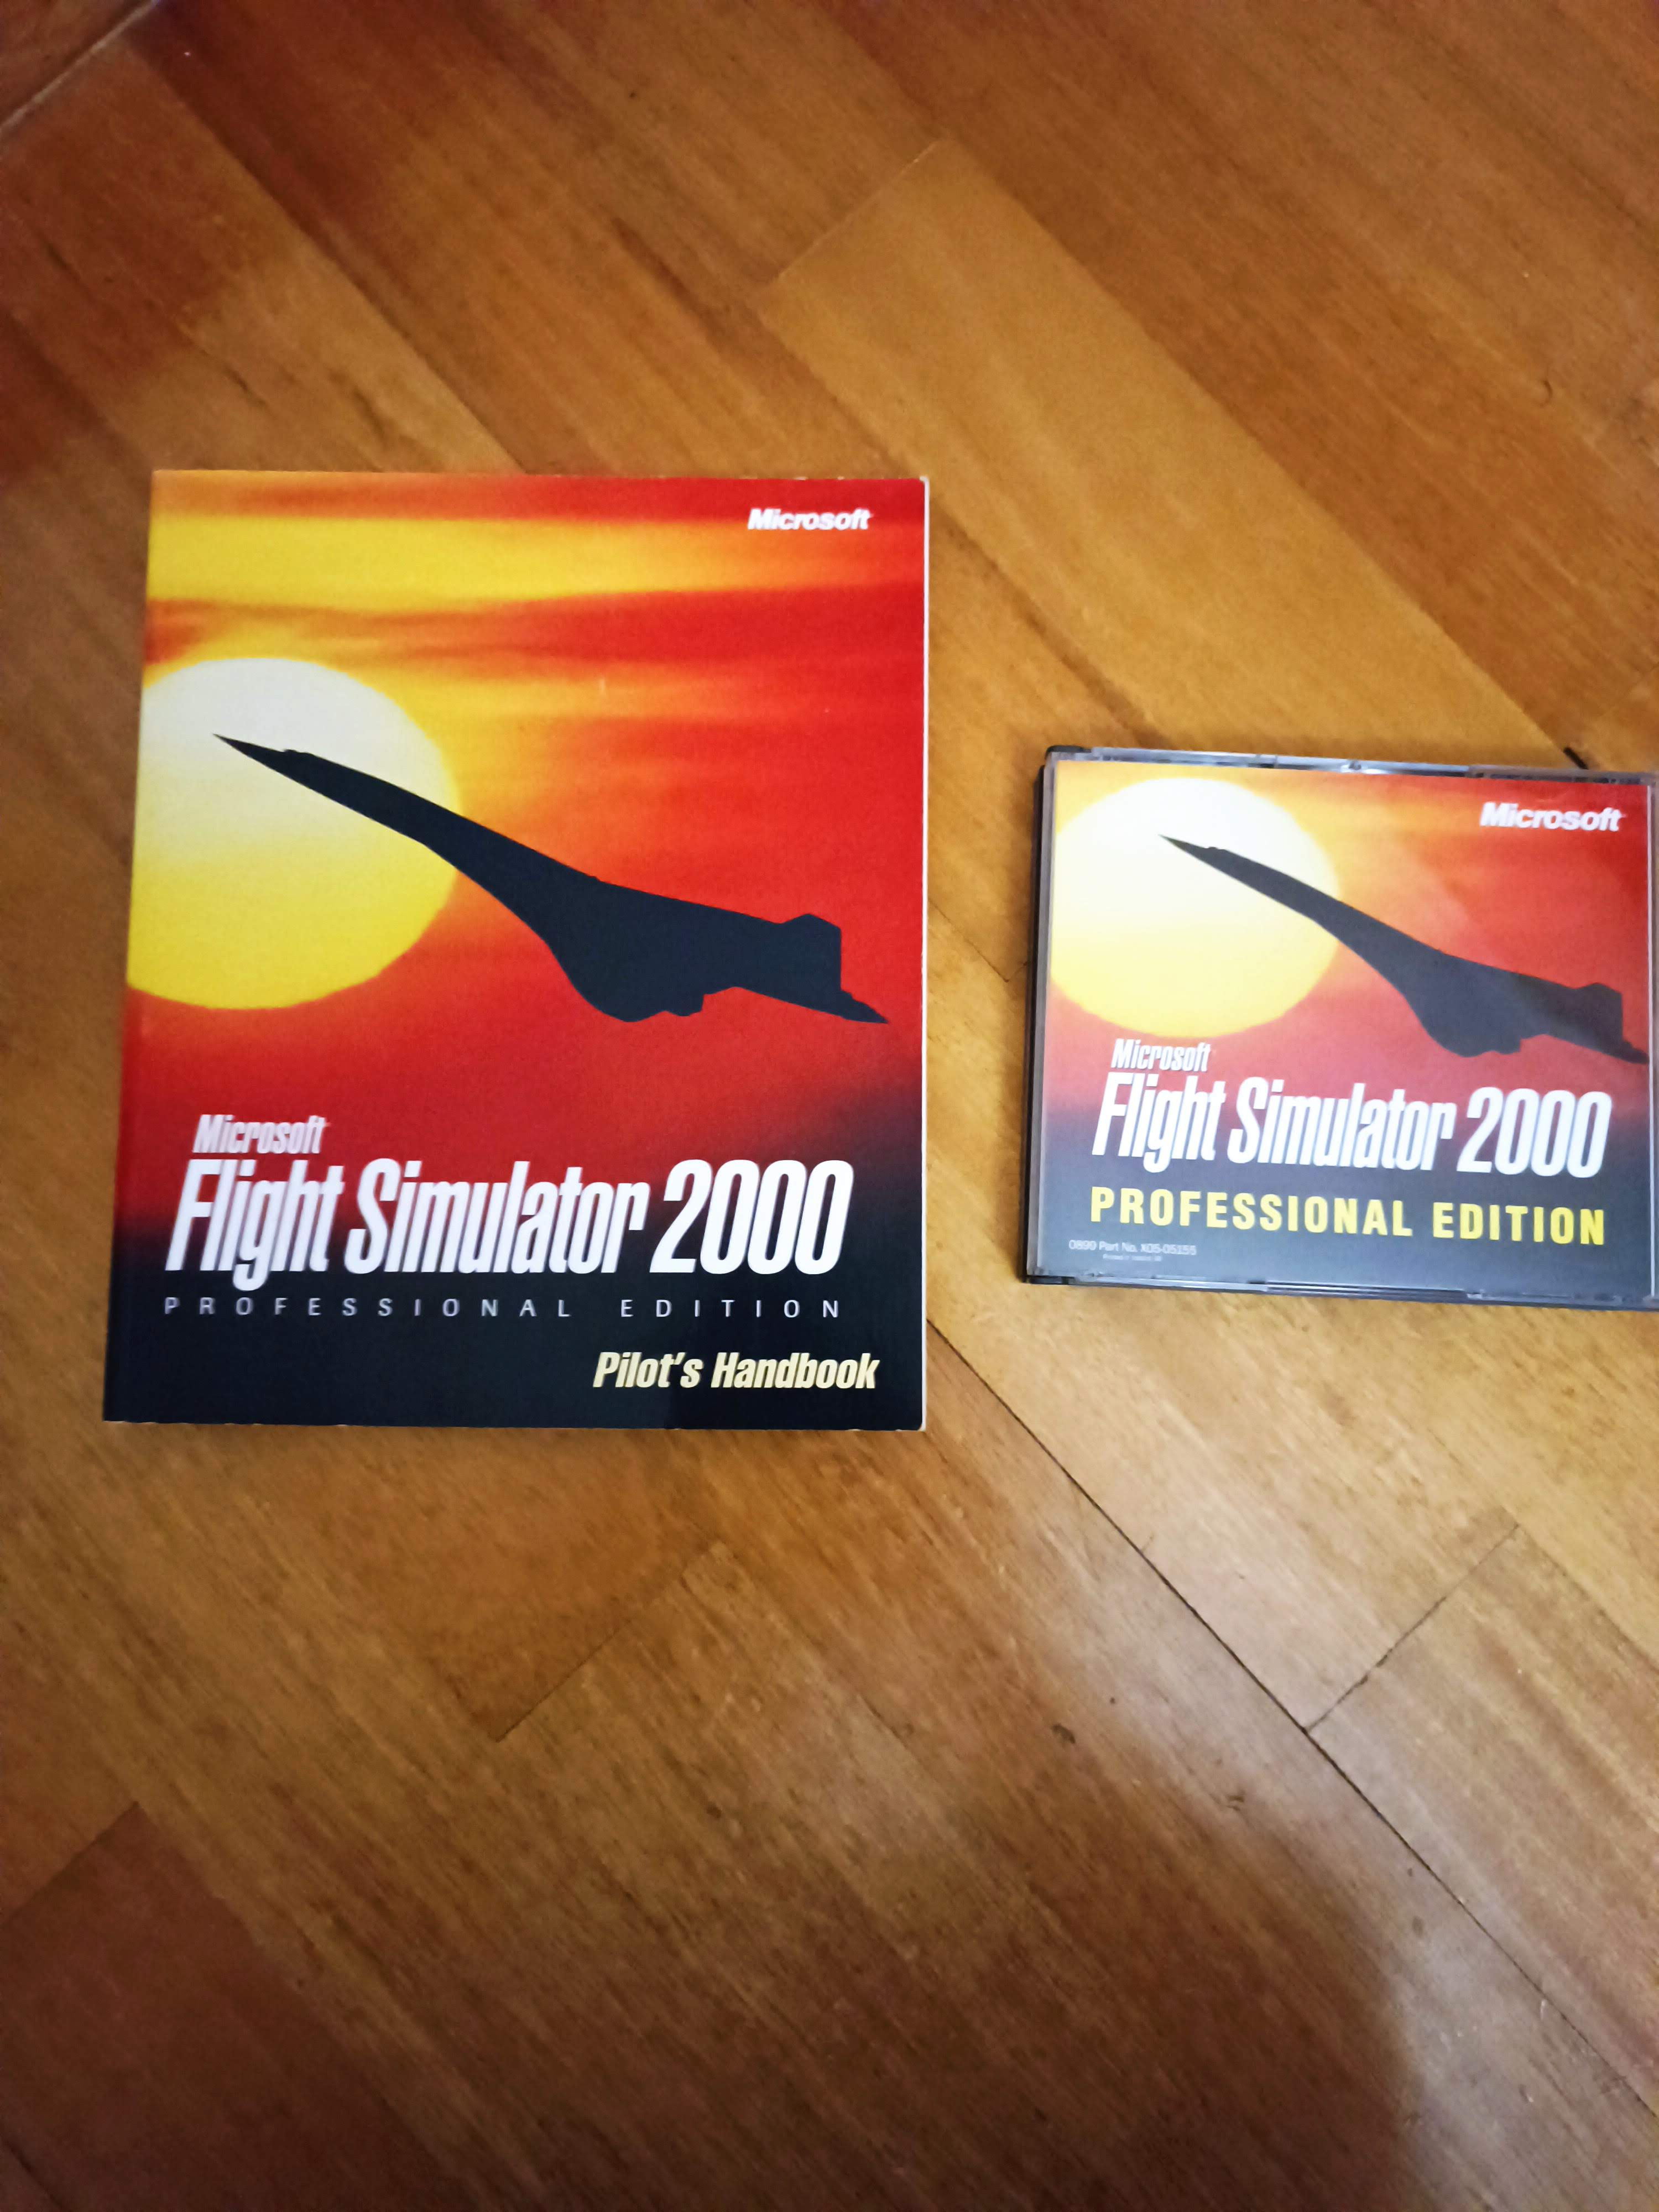 More information about "Flight simulator"